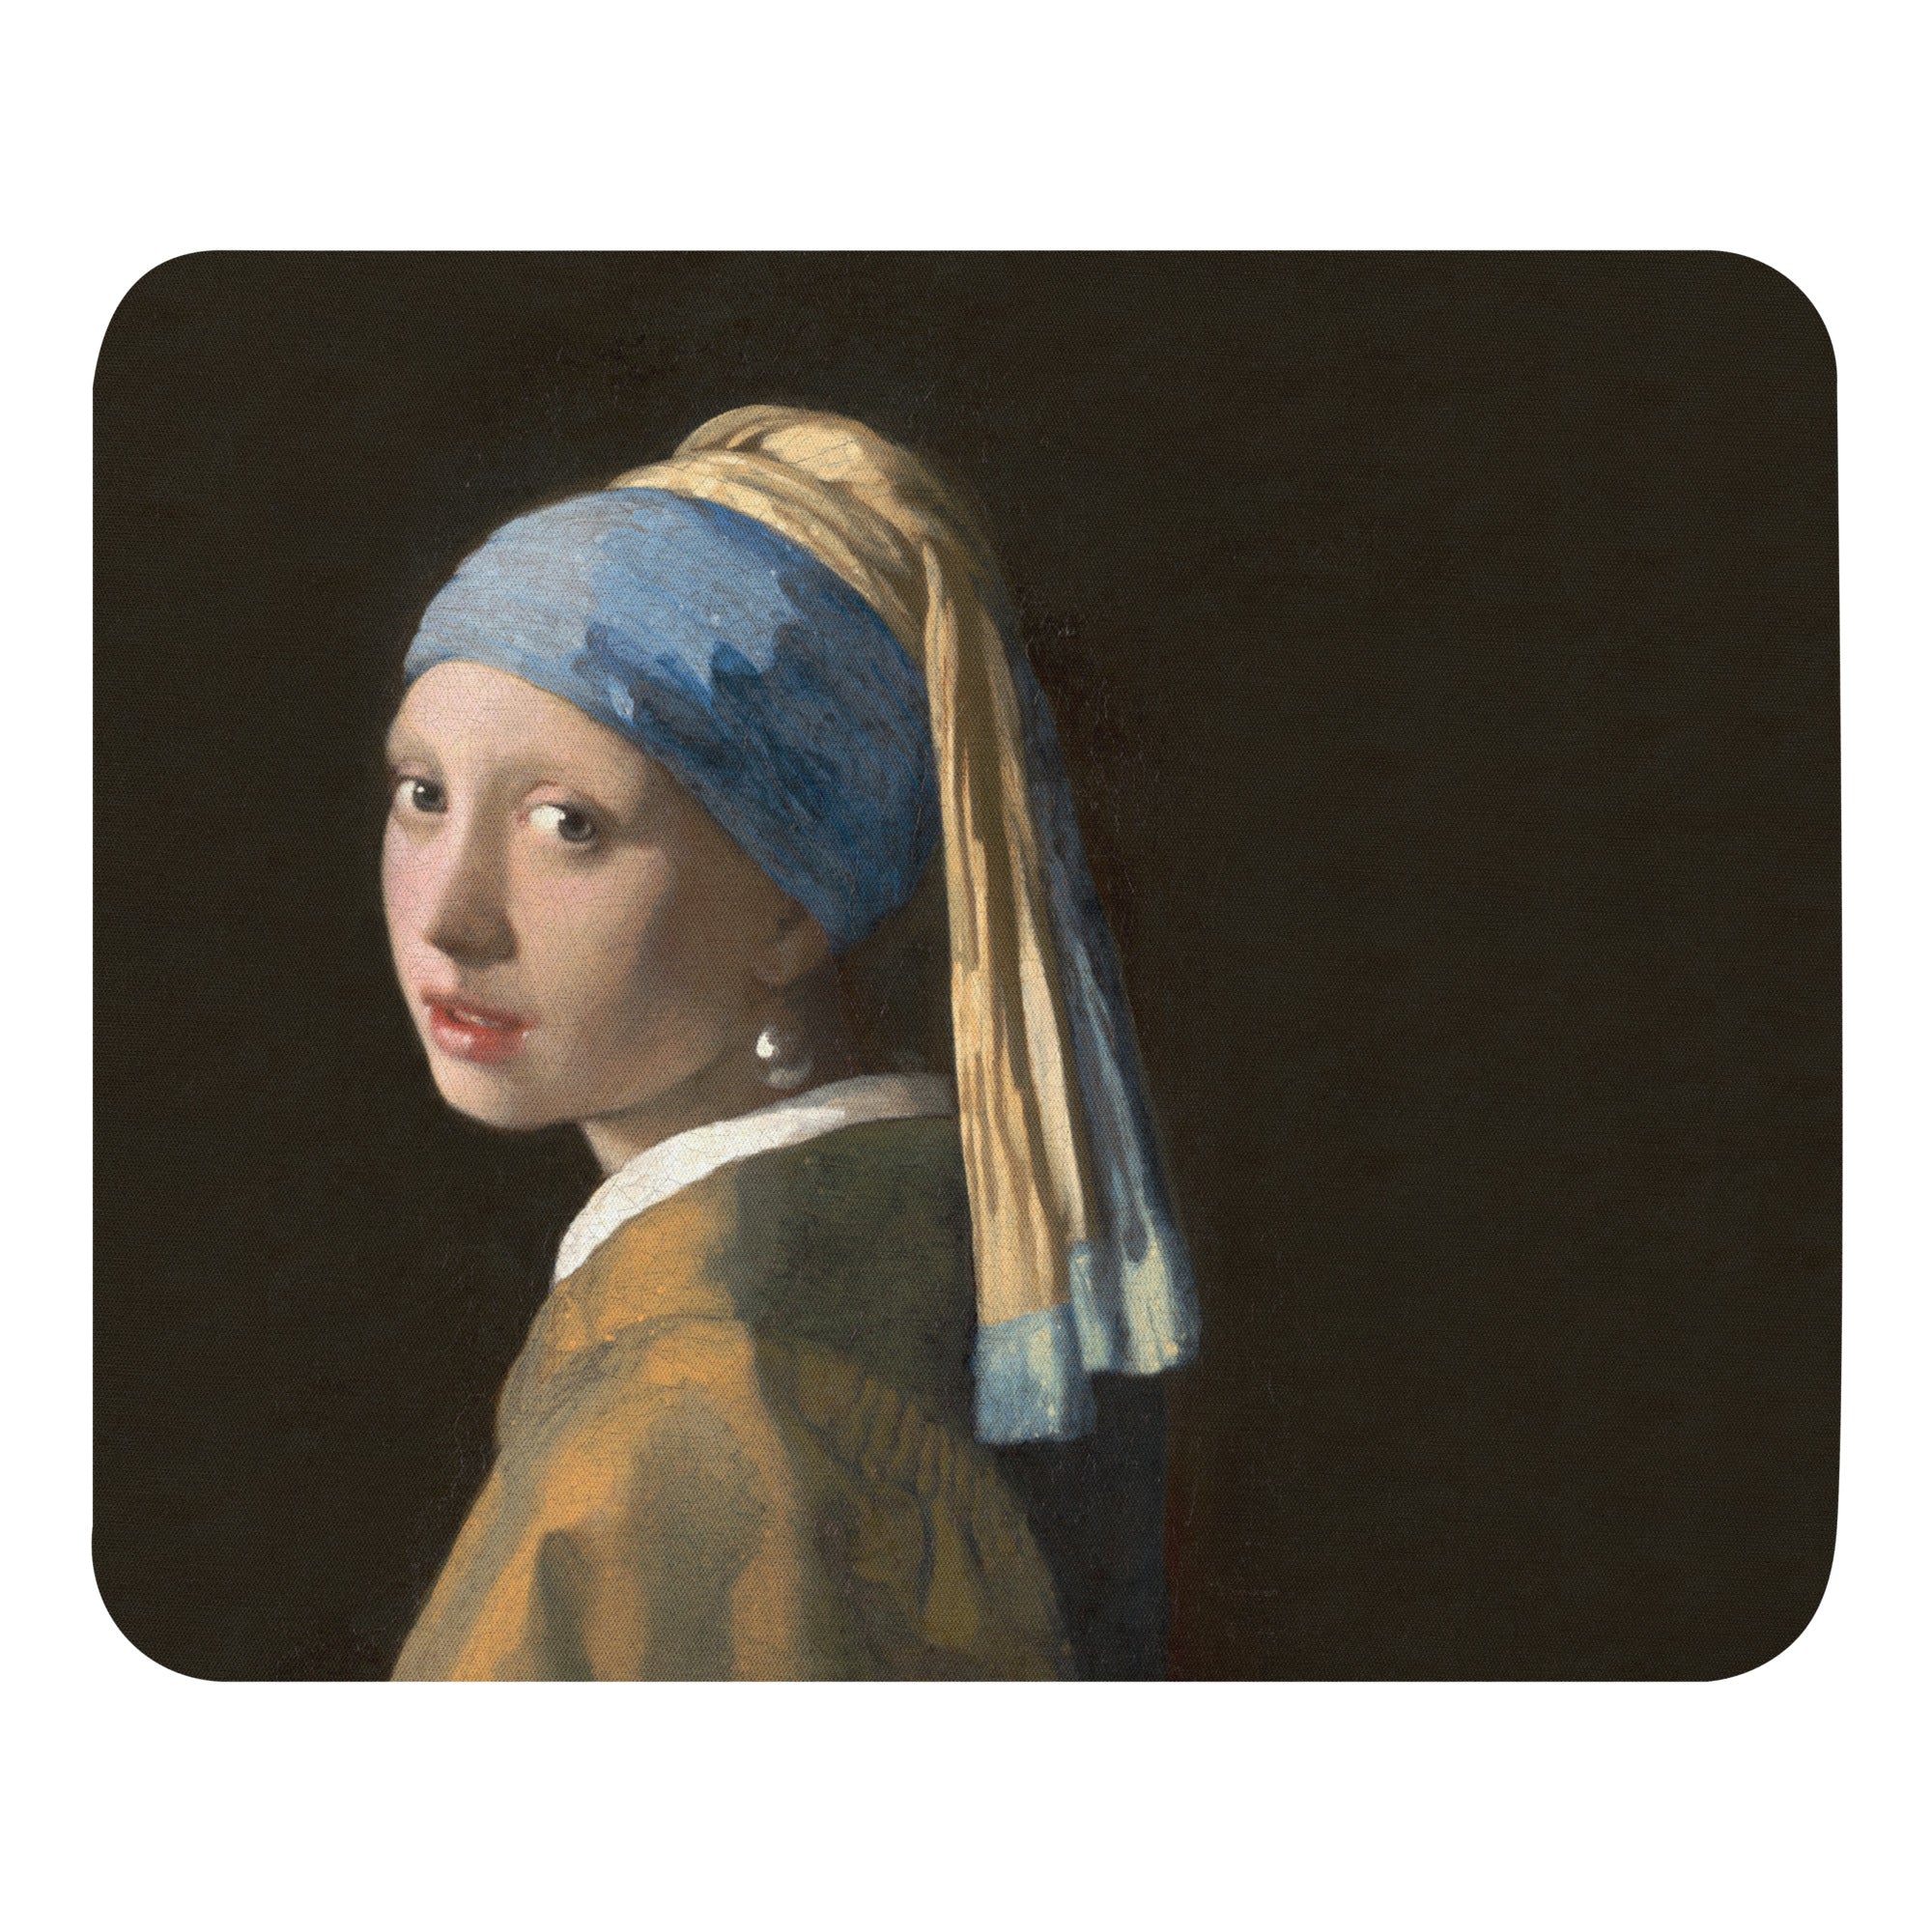 Johannes Vermeer 'Girl with a Pearl Earring' Famous Painting Mouse Pad | Premium Art Mouse Pad